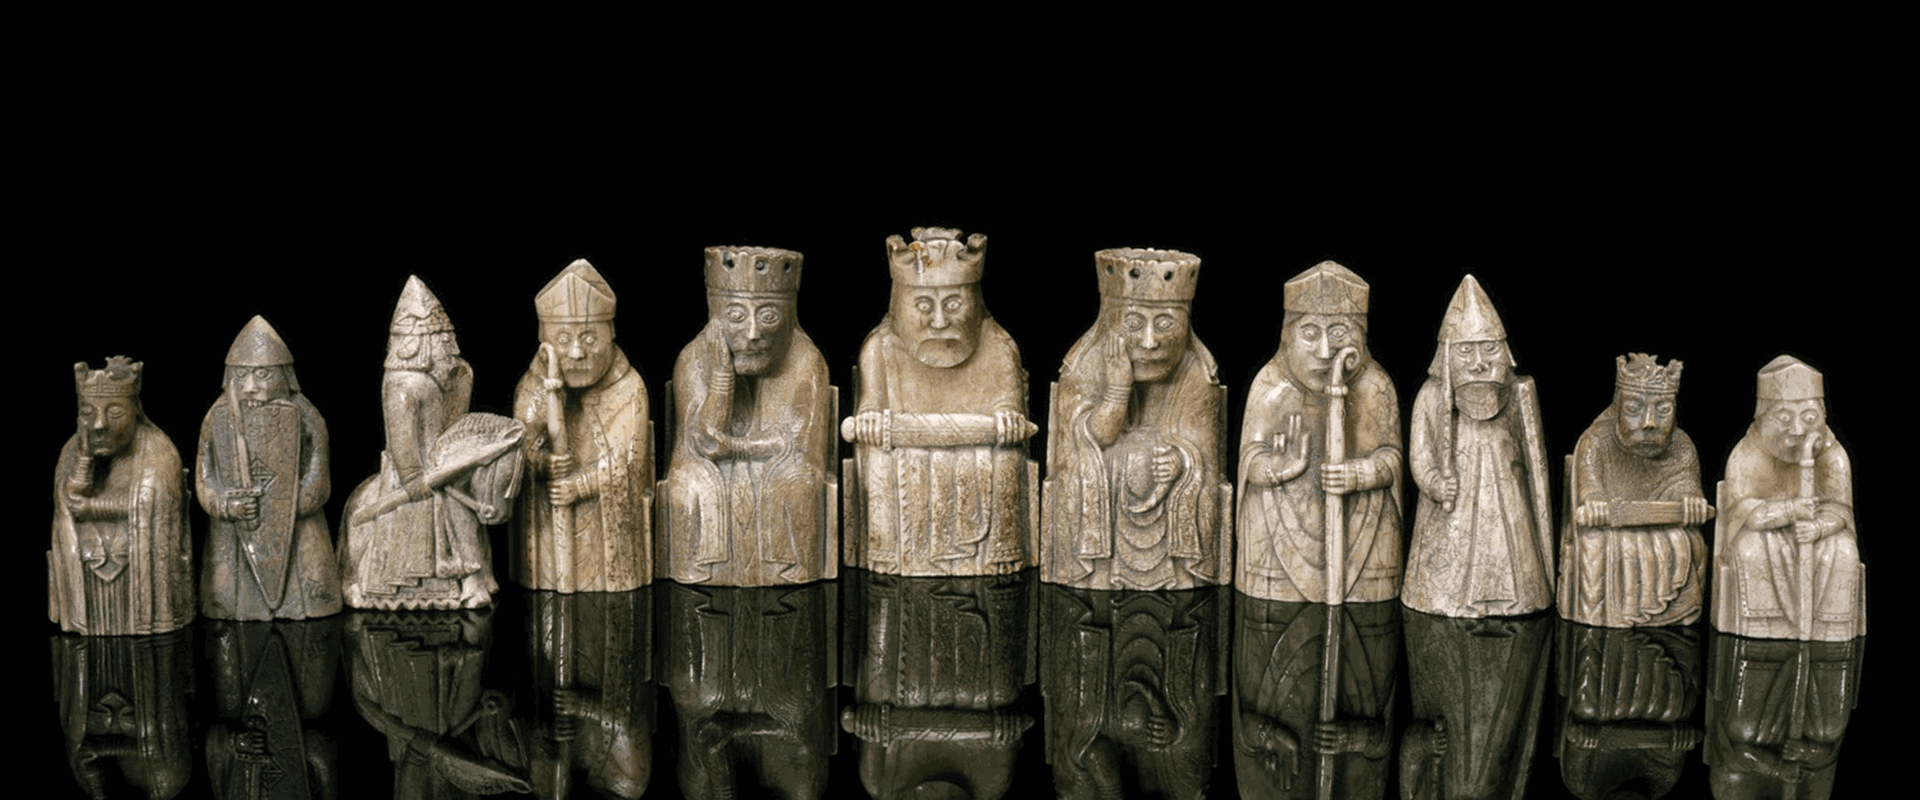 The Lewis Chess Set - Official National Museum of Scotland Edition –  National Museums Scotland Shop